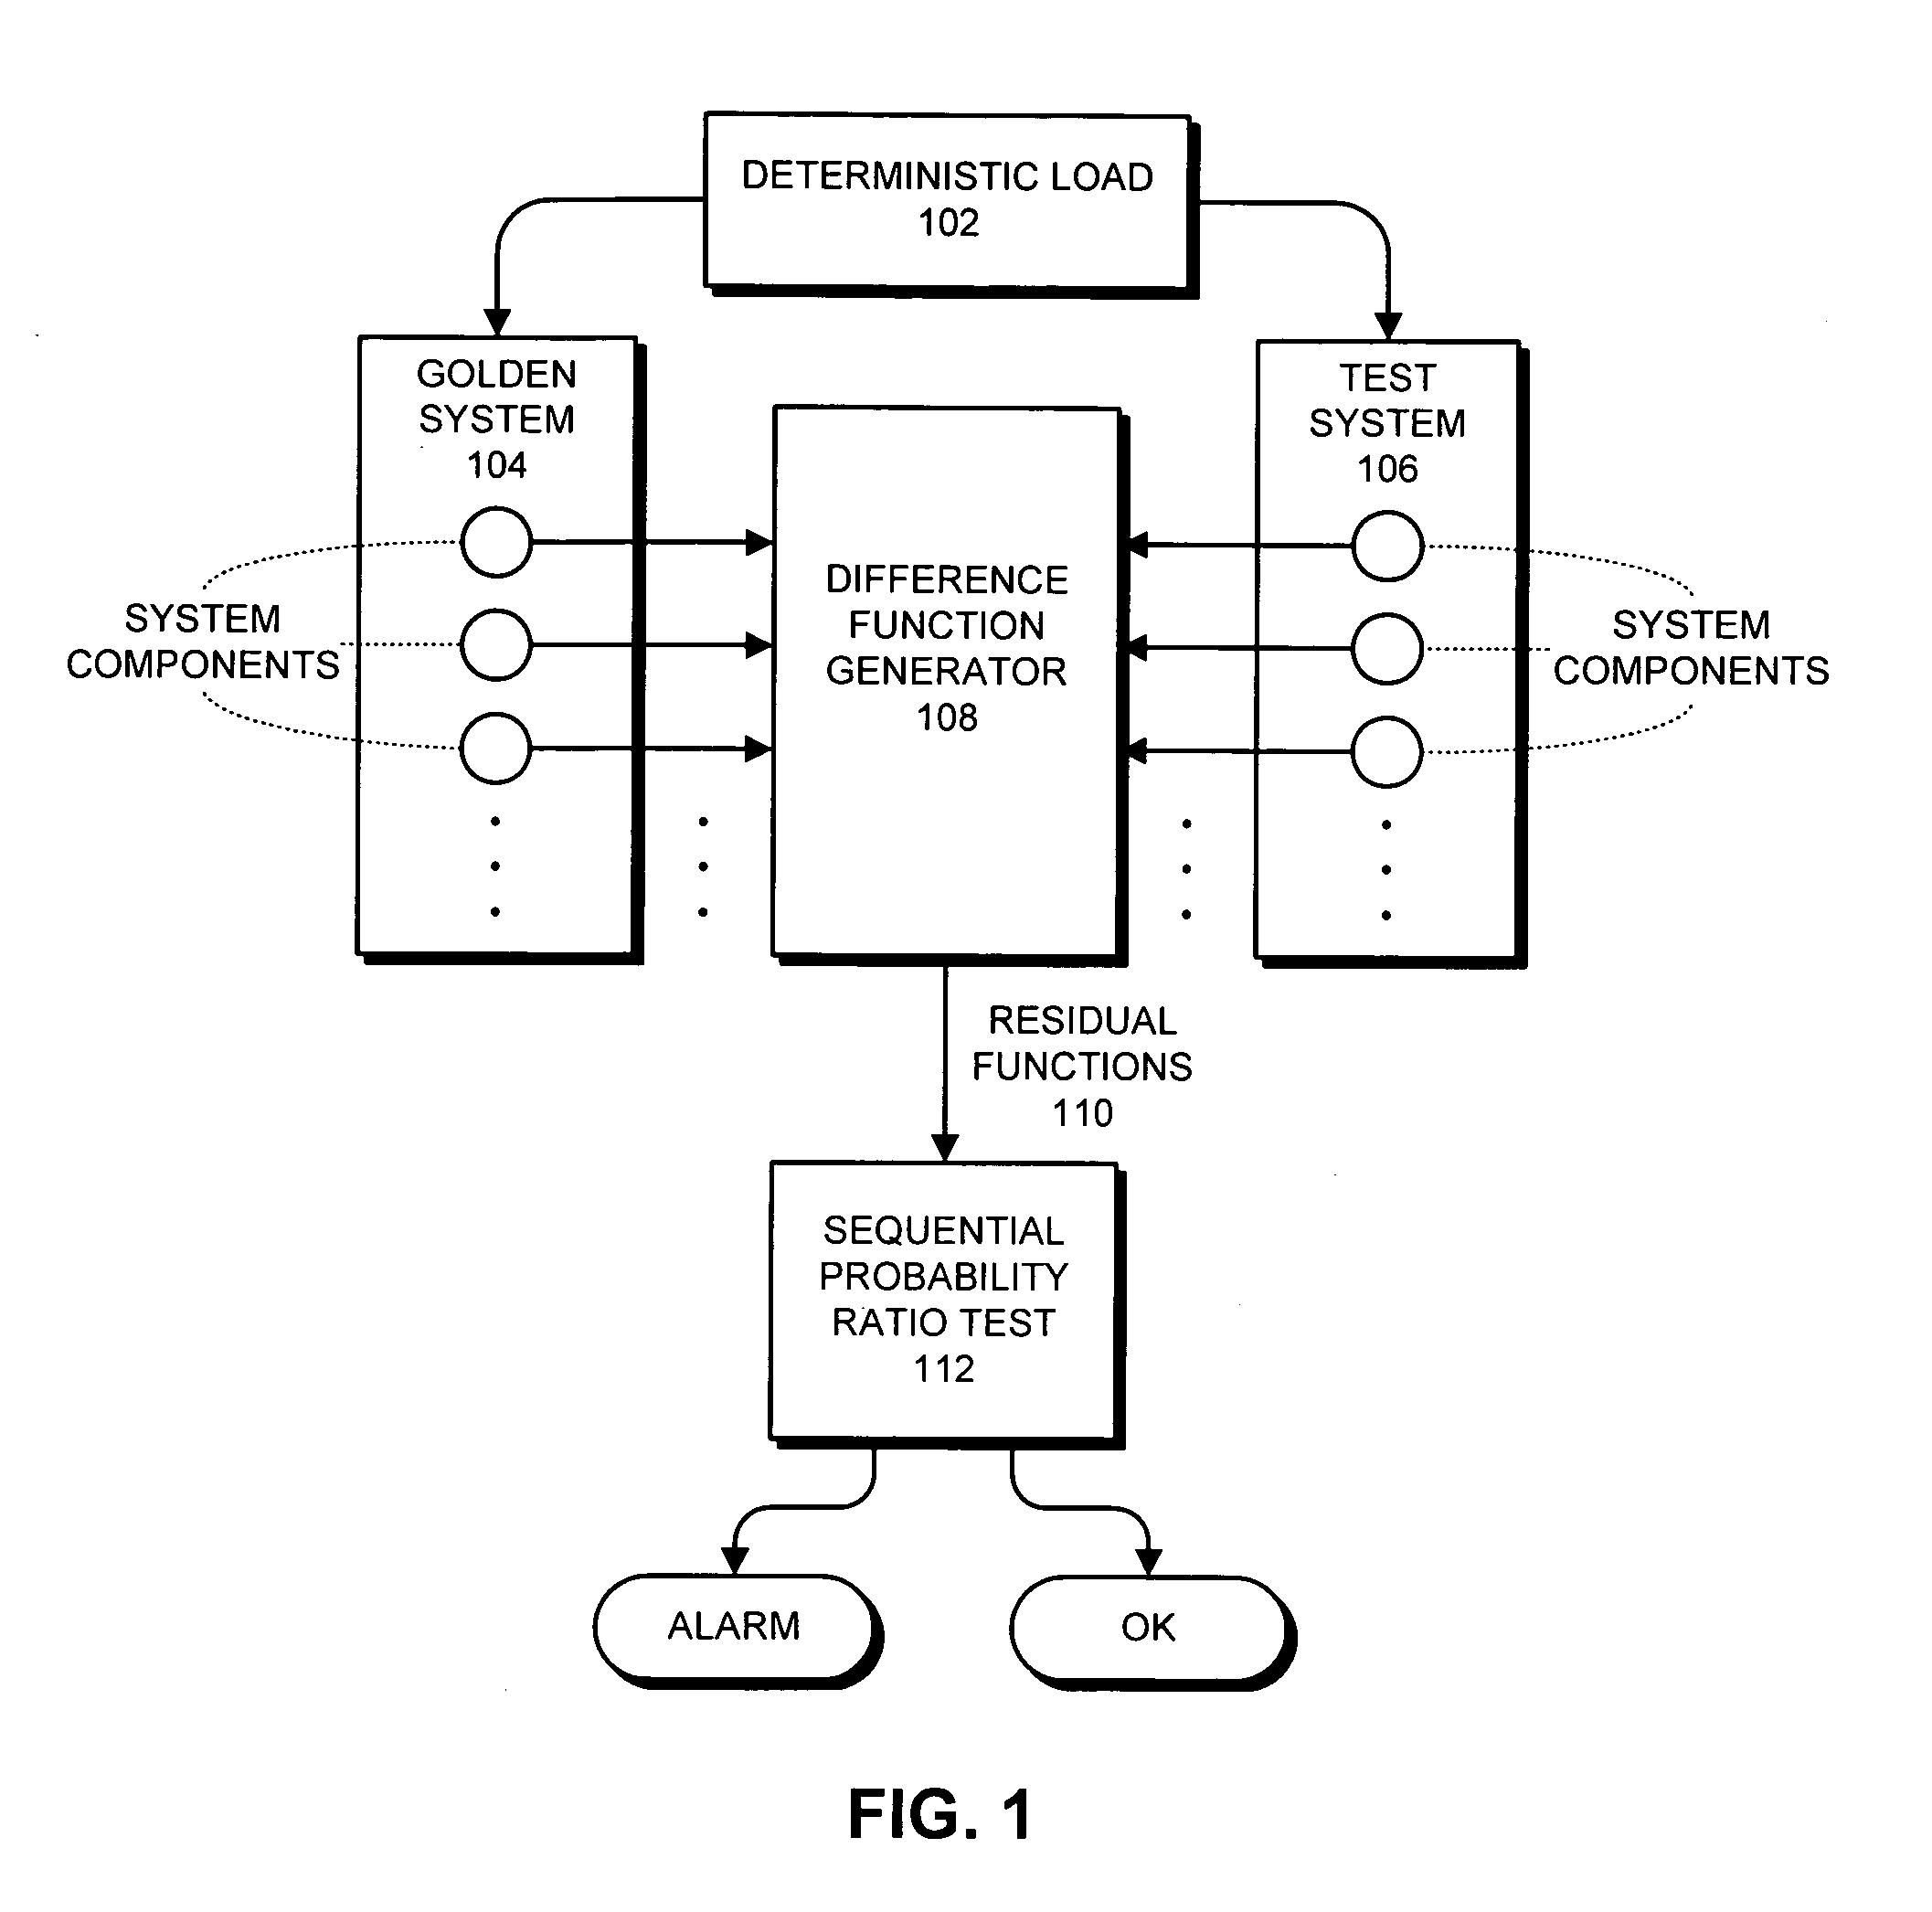 Method and apparatus for identifying mechanisms responsible for "no-trouble-found" (NTF) events in computer systems